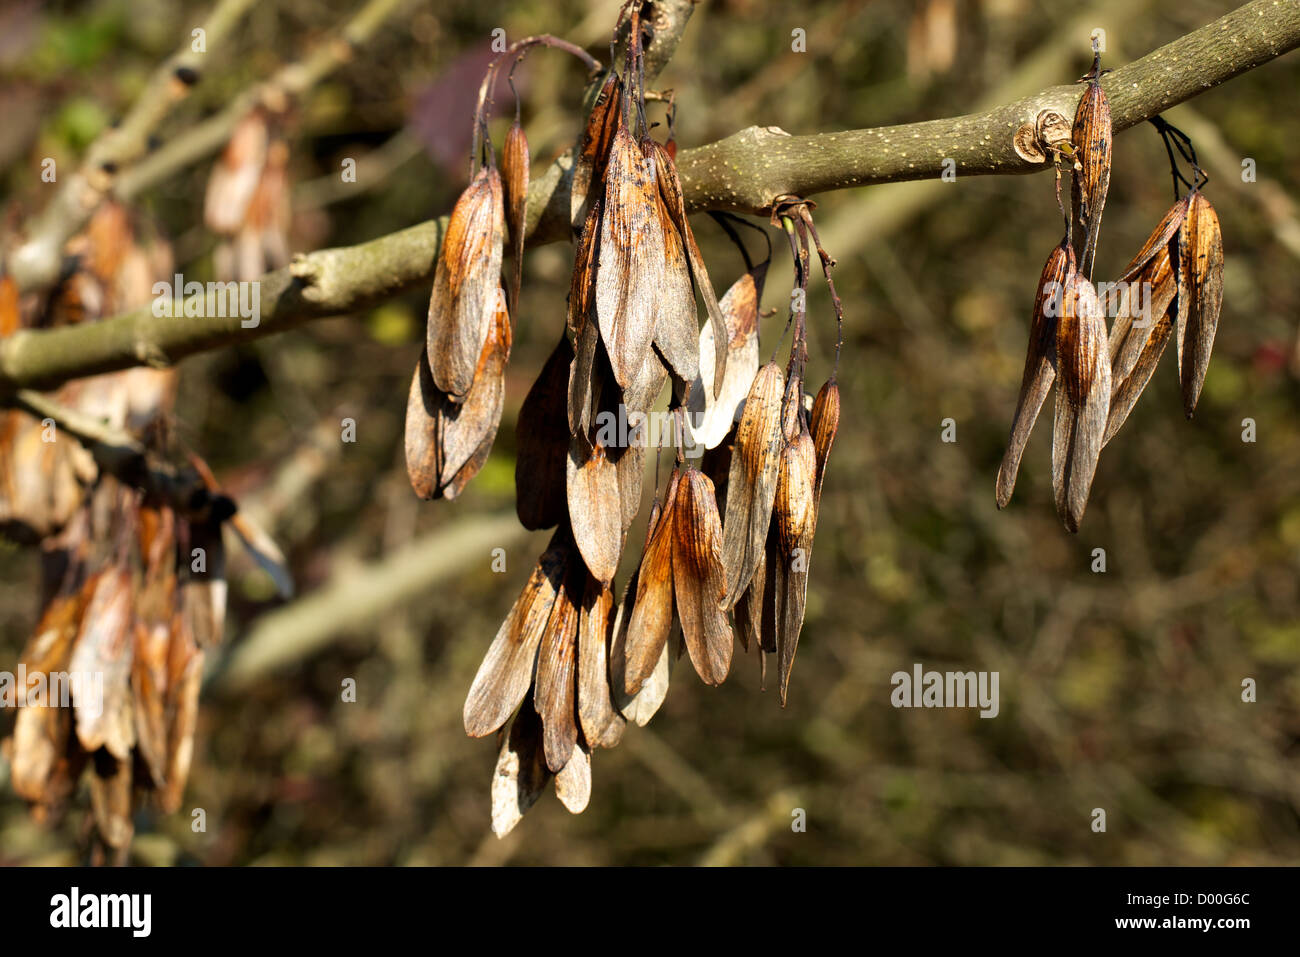 Fraxinus Excelsius broadleaf deciduous Ash Tree Seeds in the low November sun Stock Photo